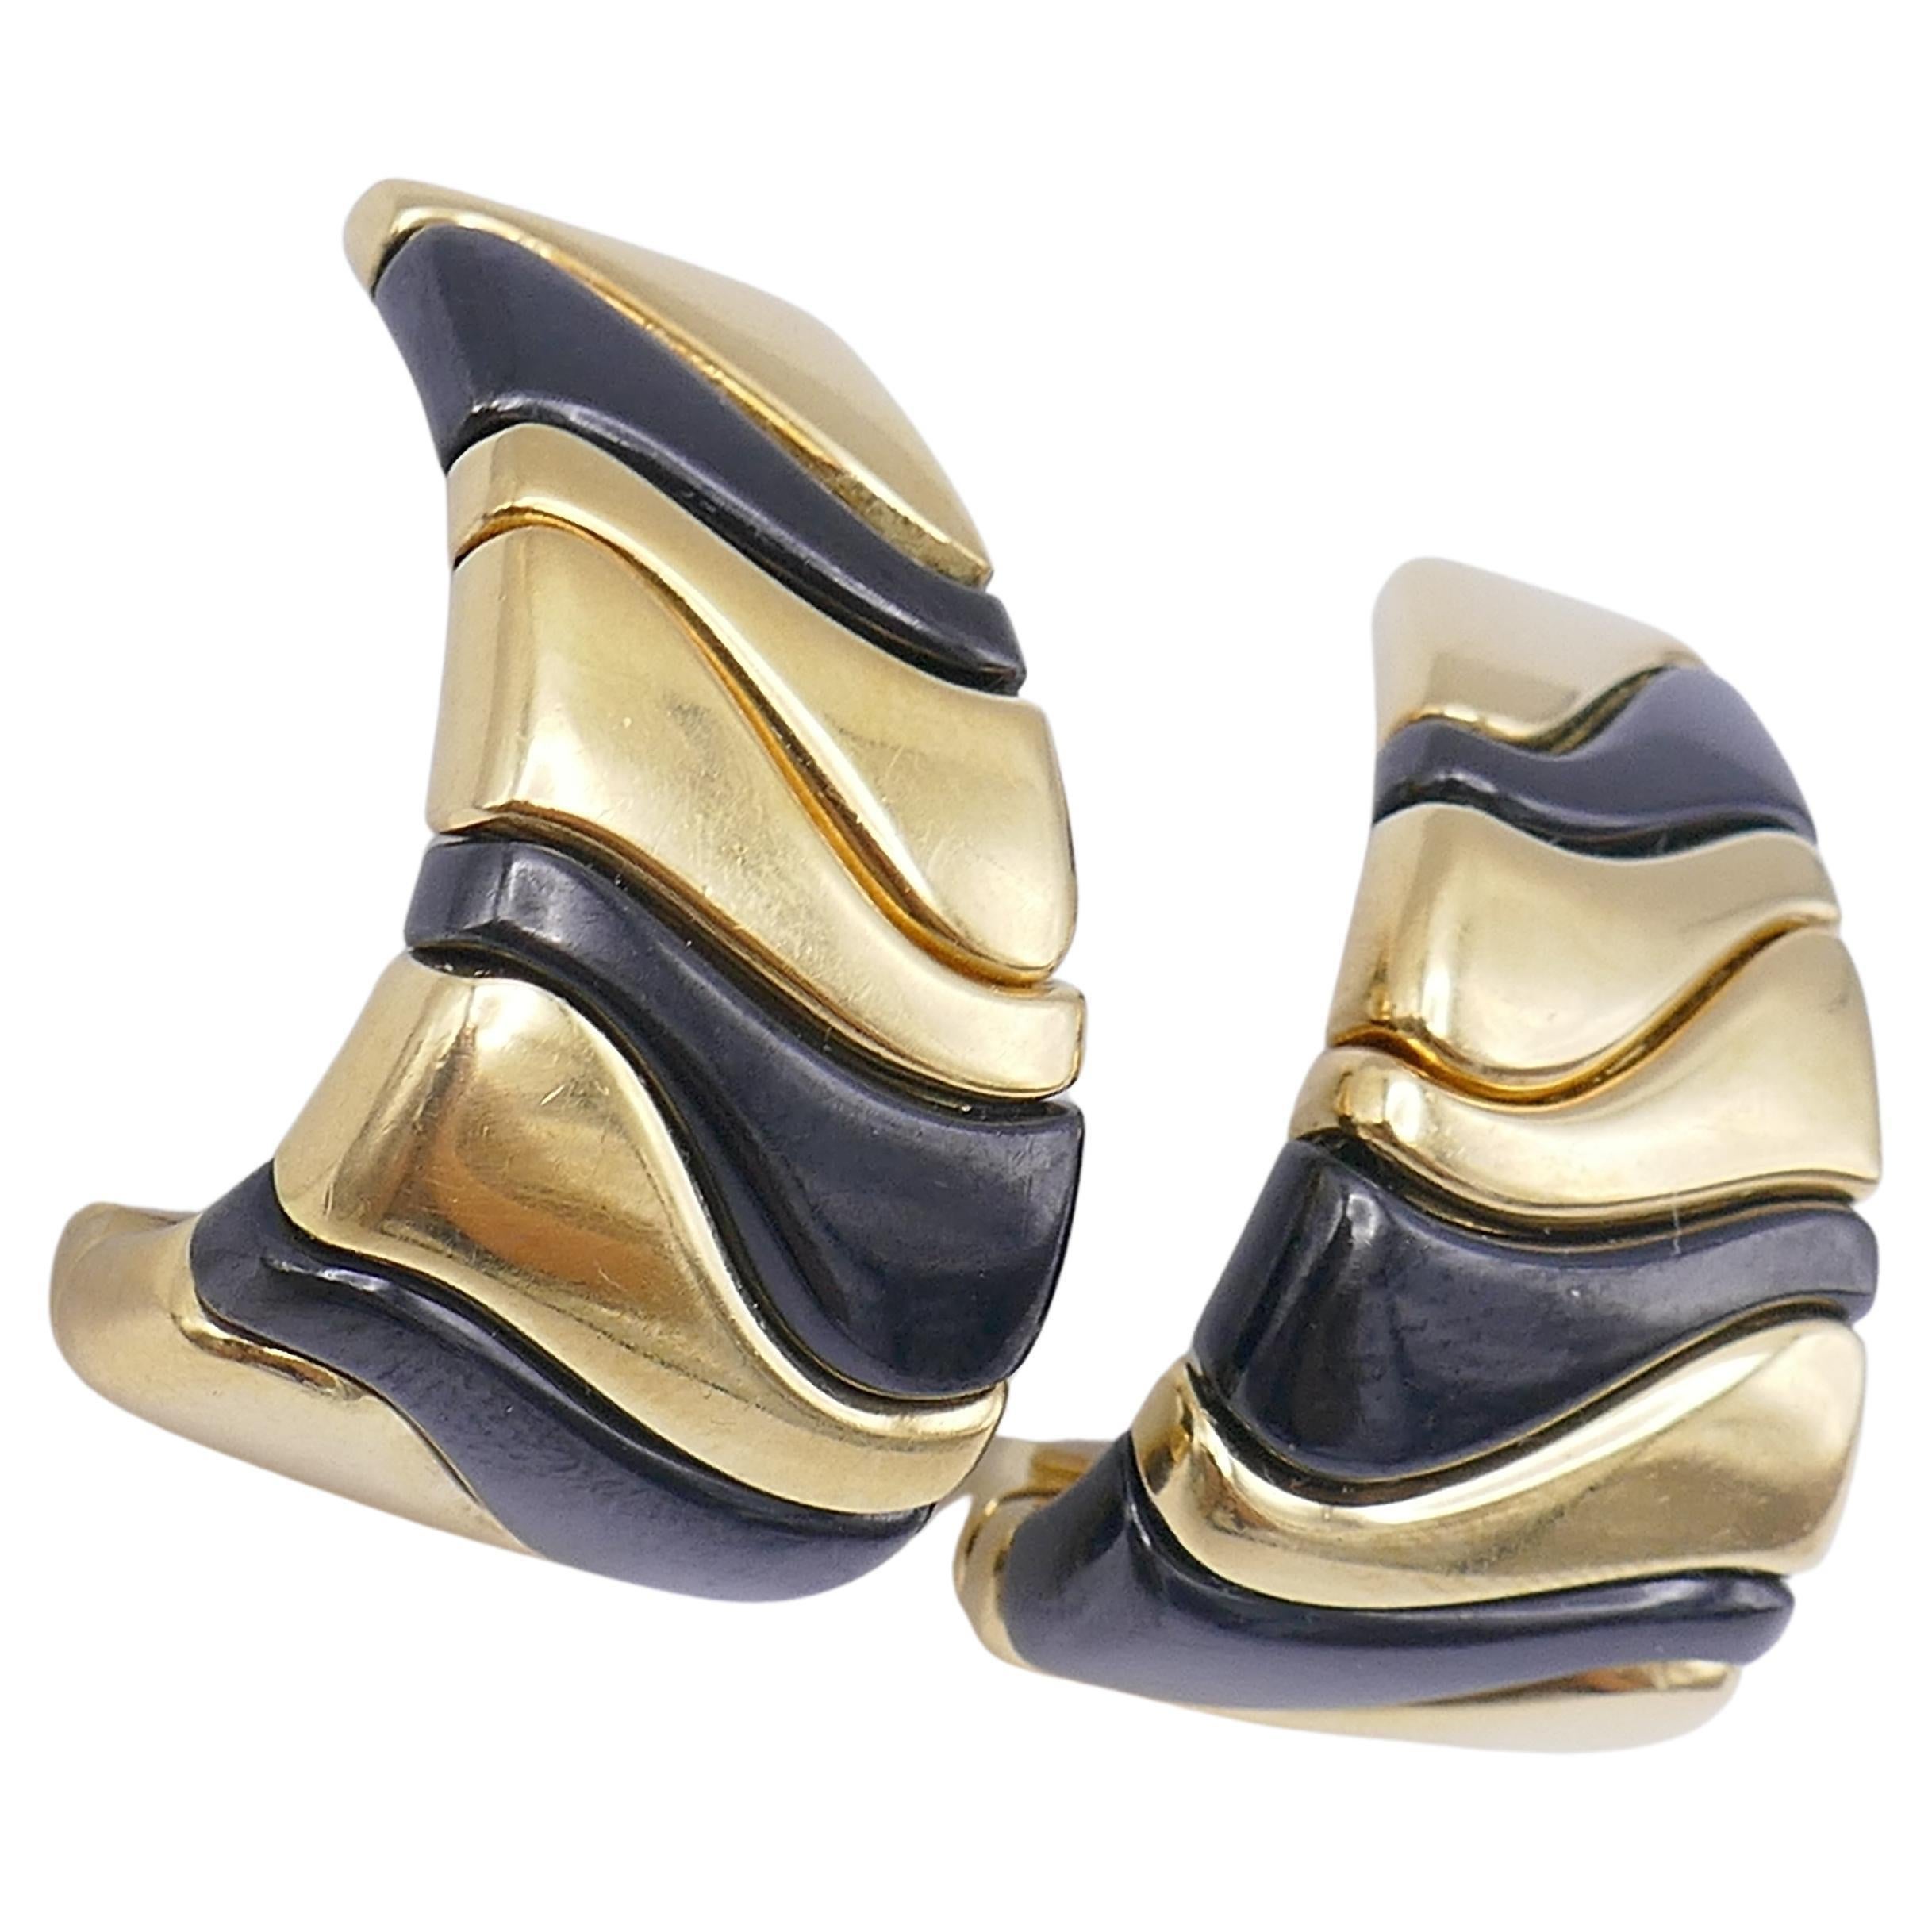 A pair of a statement earrings by Marina B, from 1987 (stamped) . Made of 18k yellow gold, onyx and stainless steel. Stamped with Marina B maker's mark, a hallmark for 18k gold, a country of production (Italy) and a serial number. 
Measurements: 1